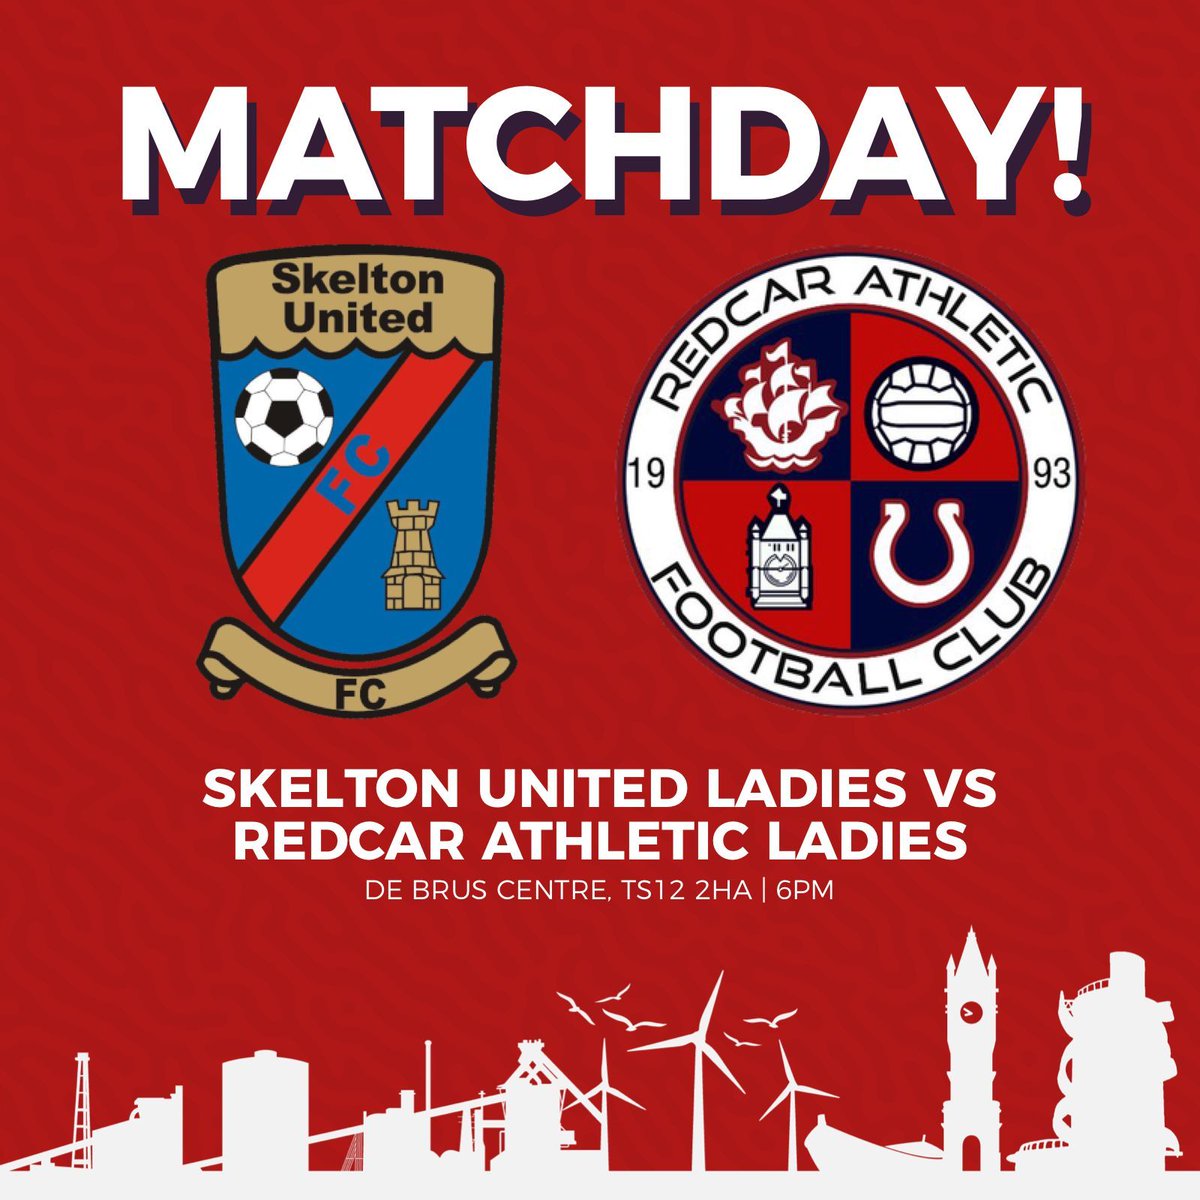 Our Ladies are in action away from home this evening. 👊 #UTS 🔴🔵 #Steelwomen